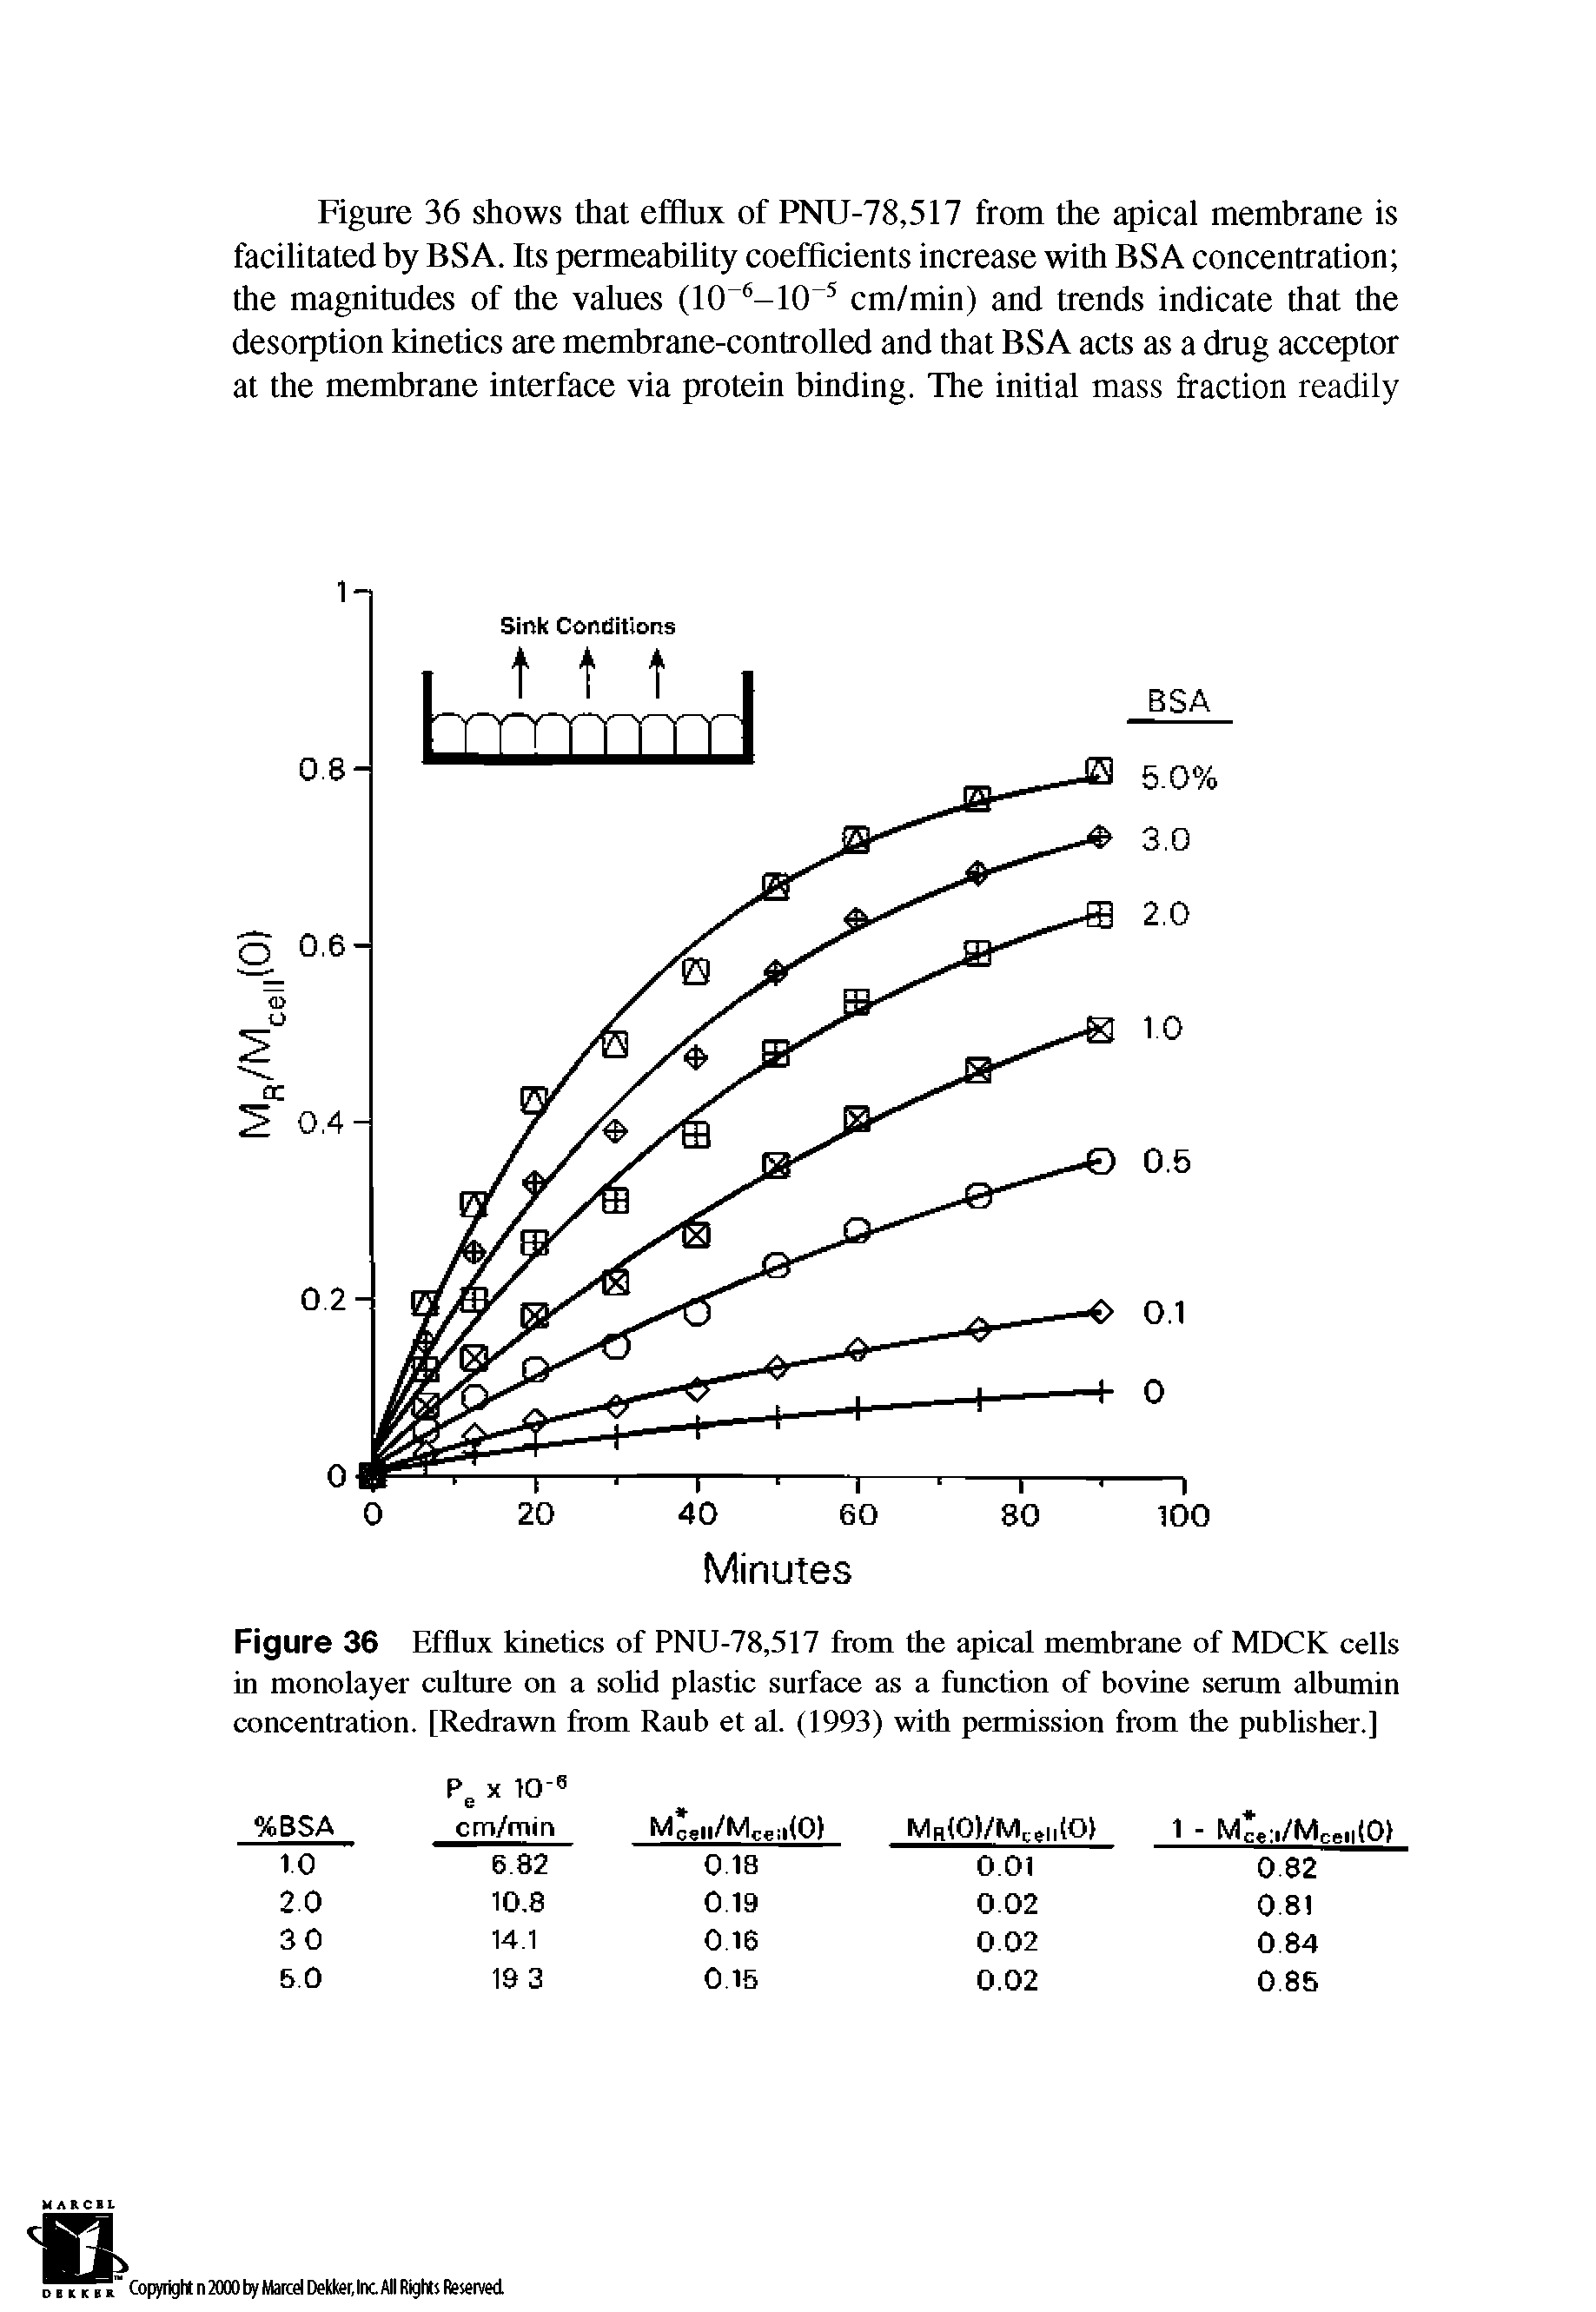 Figure 36 Efflux kinetics of PNU-78,517 from the apical membrane of MDCK cells in monolayer culture on a solid plastic surface as a function of bovine serum albumin concentration. [Redrawn from Raub et al. (1993) with permission from the publisher.]...